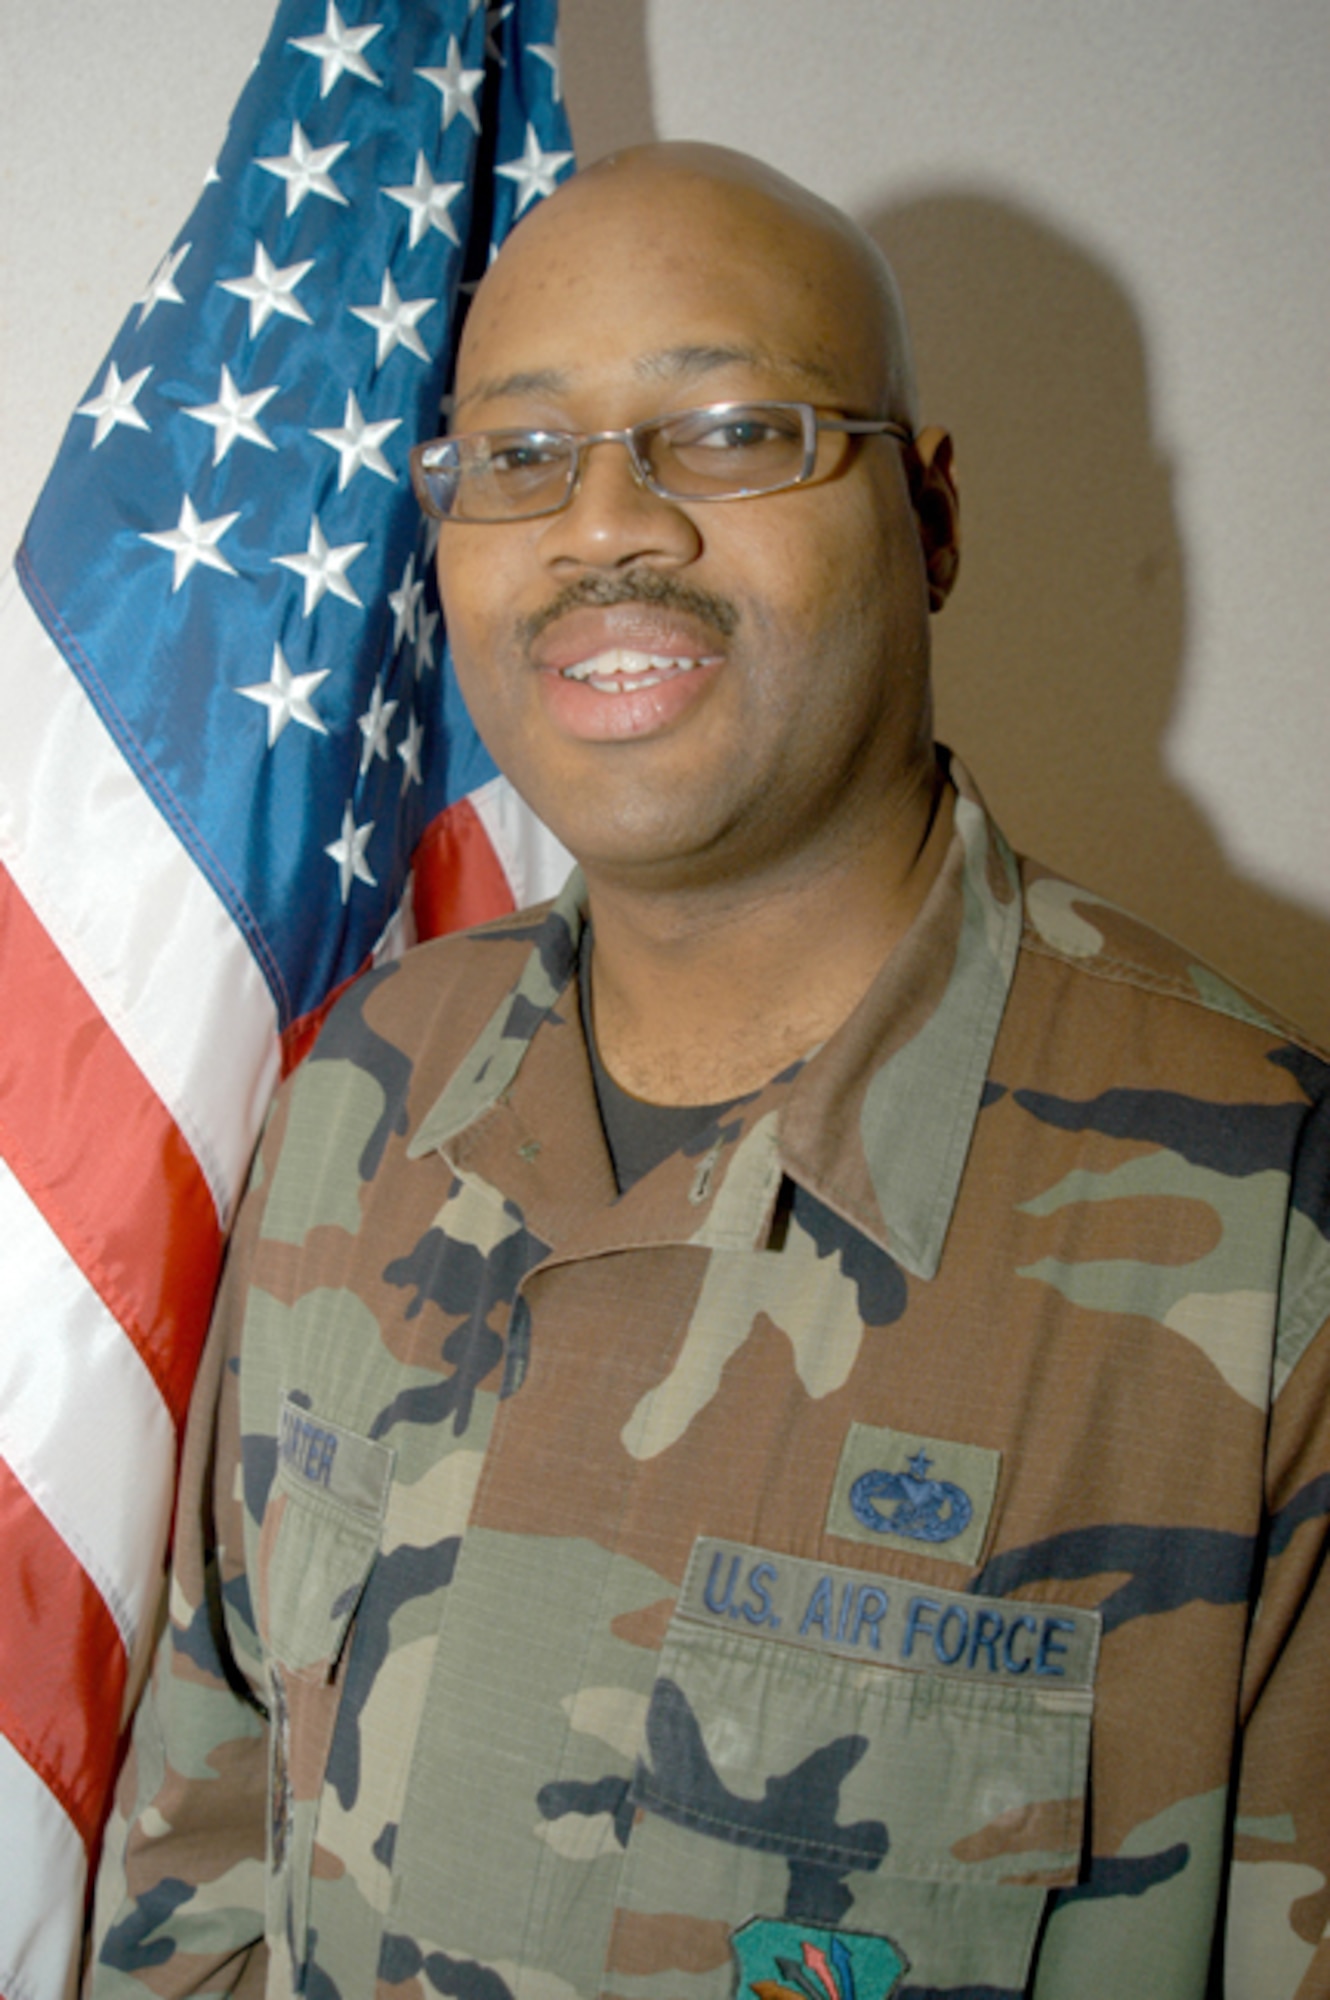 GRISSOM AIR RESERVE BASE, Ind. -- Master Sgt. James Carter, 434th Logistics Readiness Squadron, was selected as the 434th Air Refueling Wing First Sergeant of the Year for 2006. (U.S. Air Force photo/Senior Airman Mark Orders-Woempner)